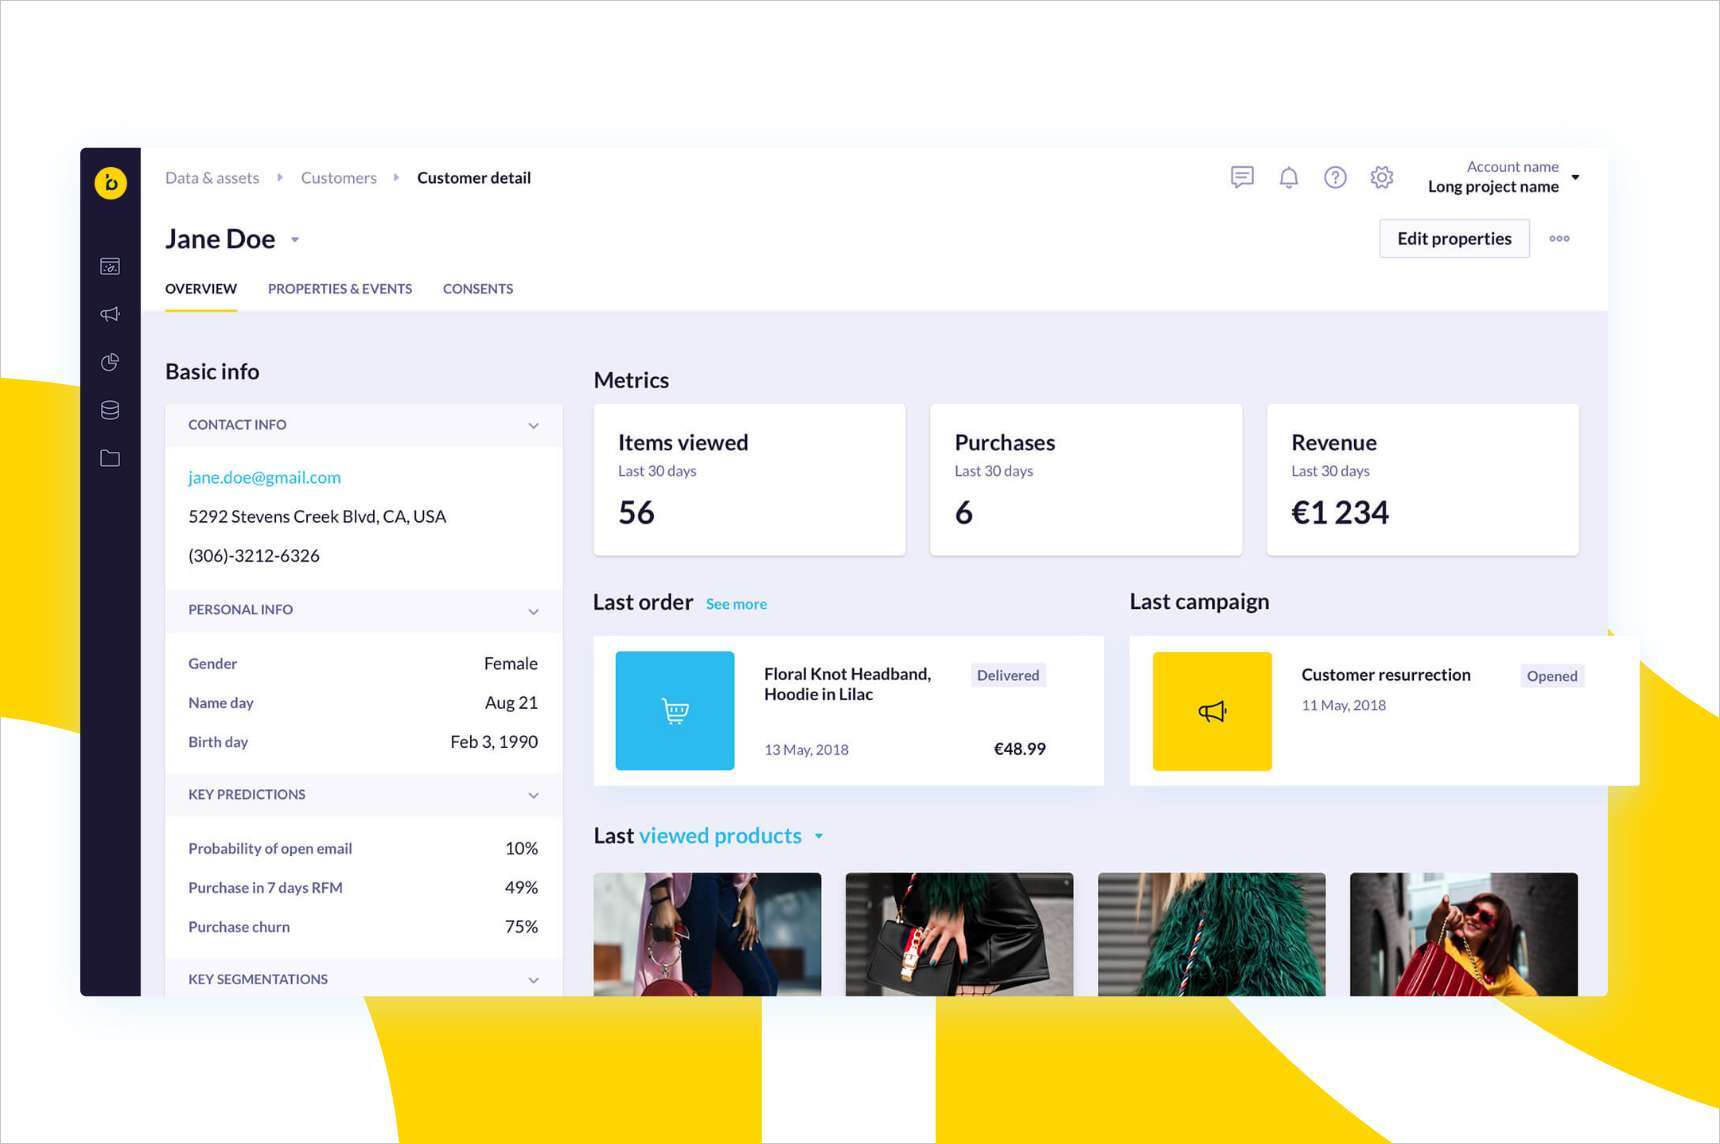 Bloomreach Engagement’s single customer view, a centralized database with customer profiles containing accurate data points for each individual who interacts with your business.